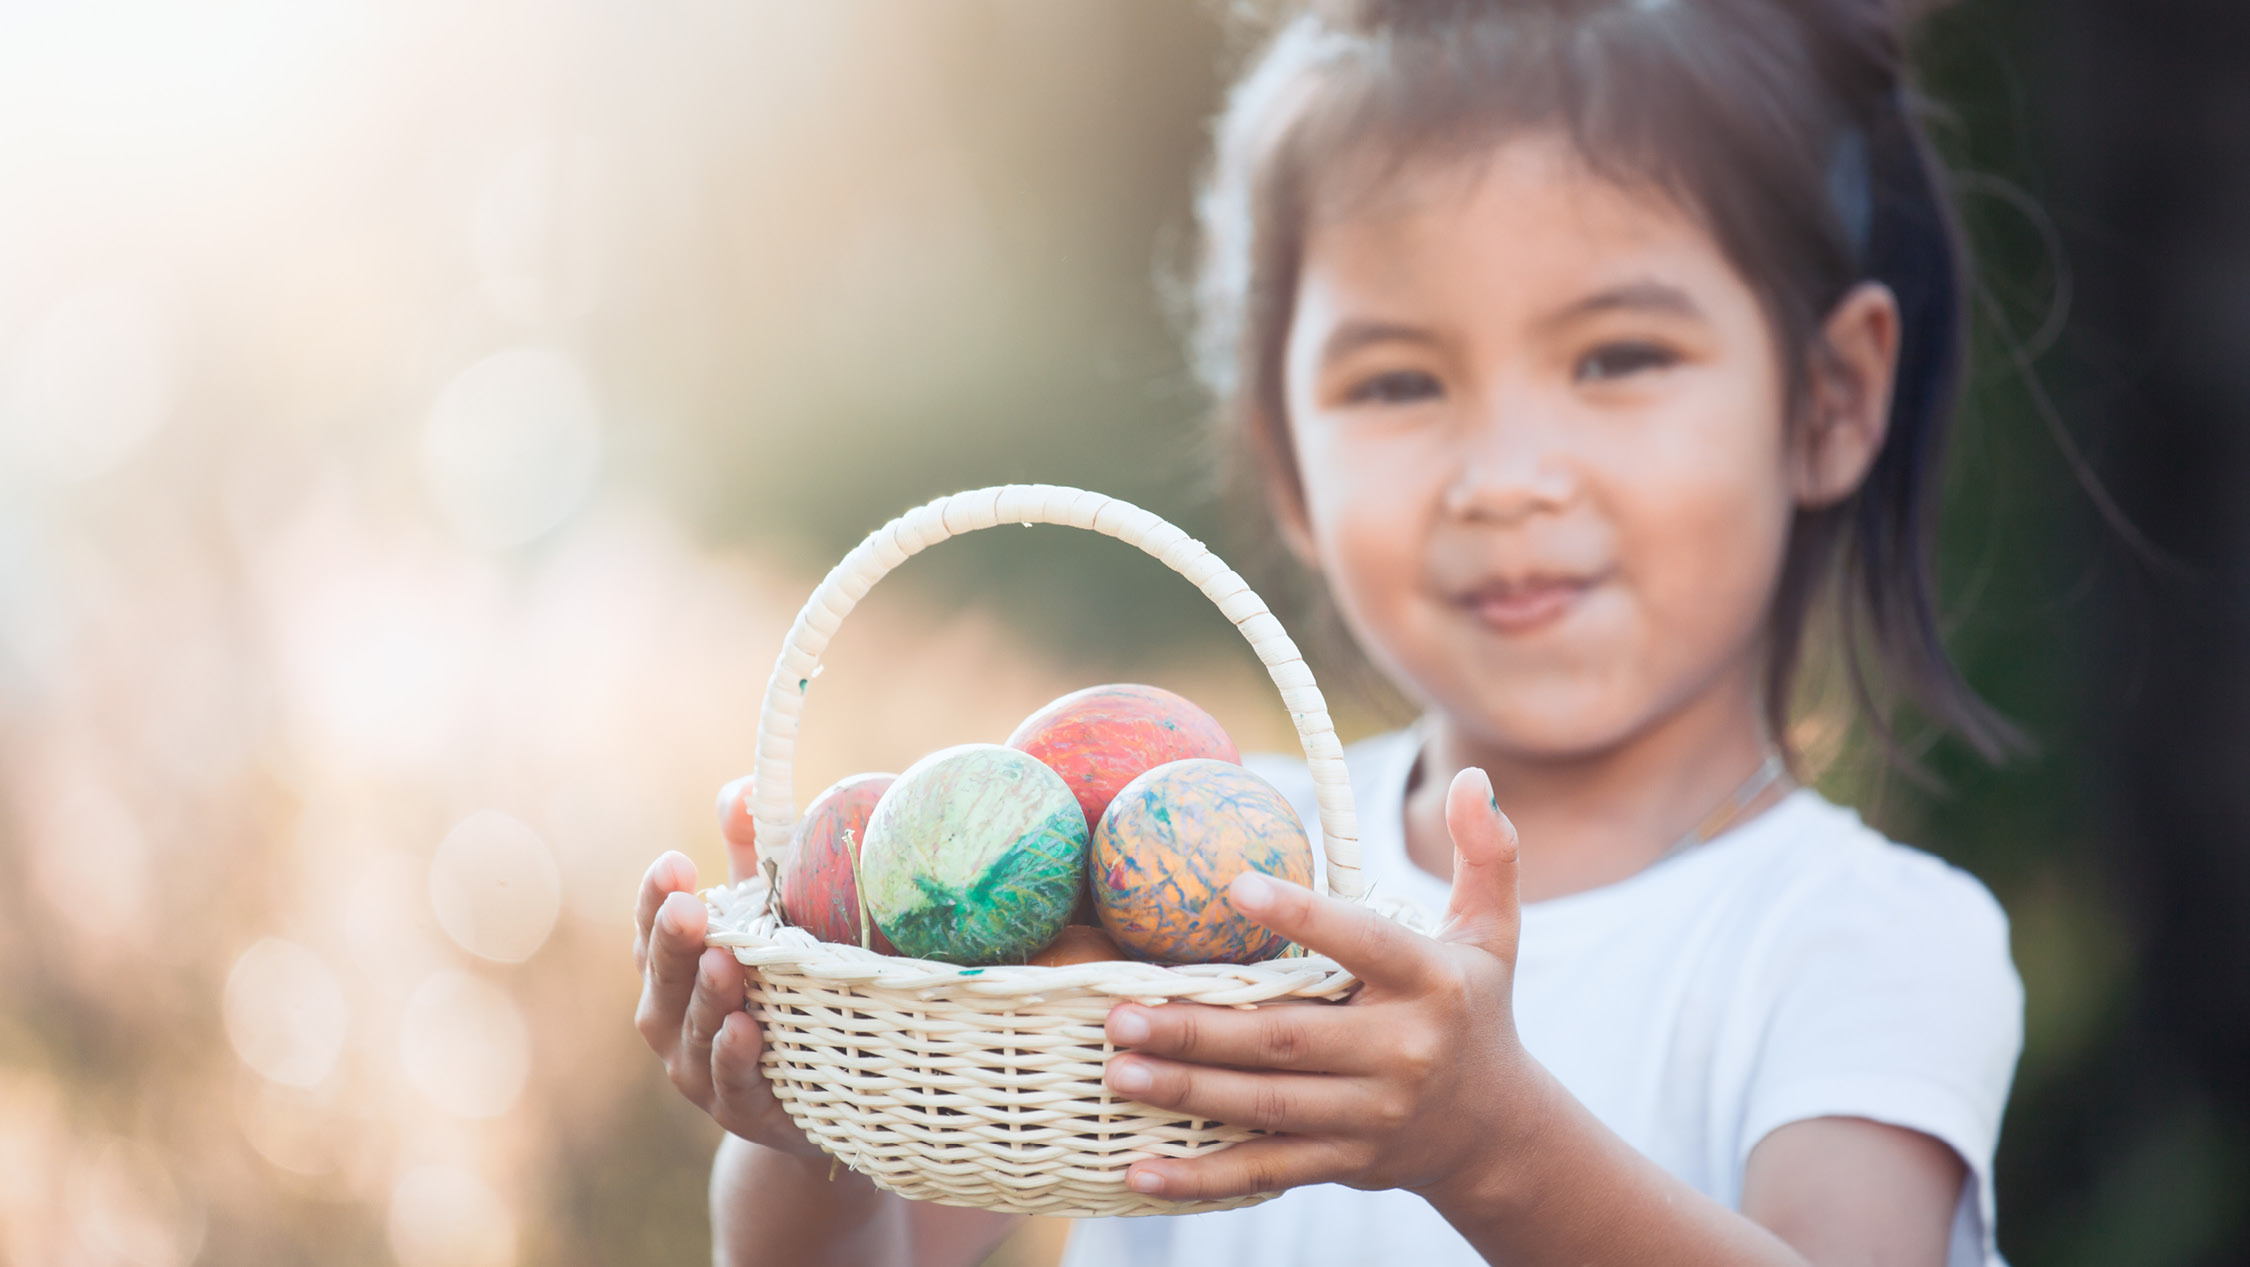 Gold Coast Easter School Holiday Guide